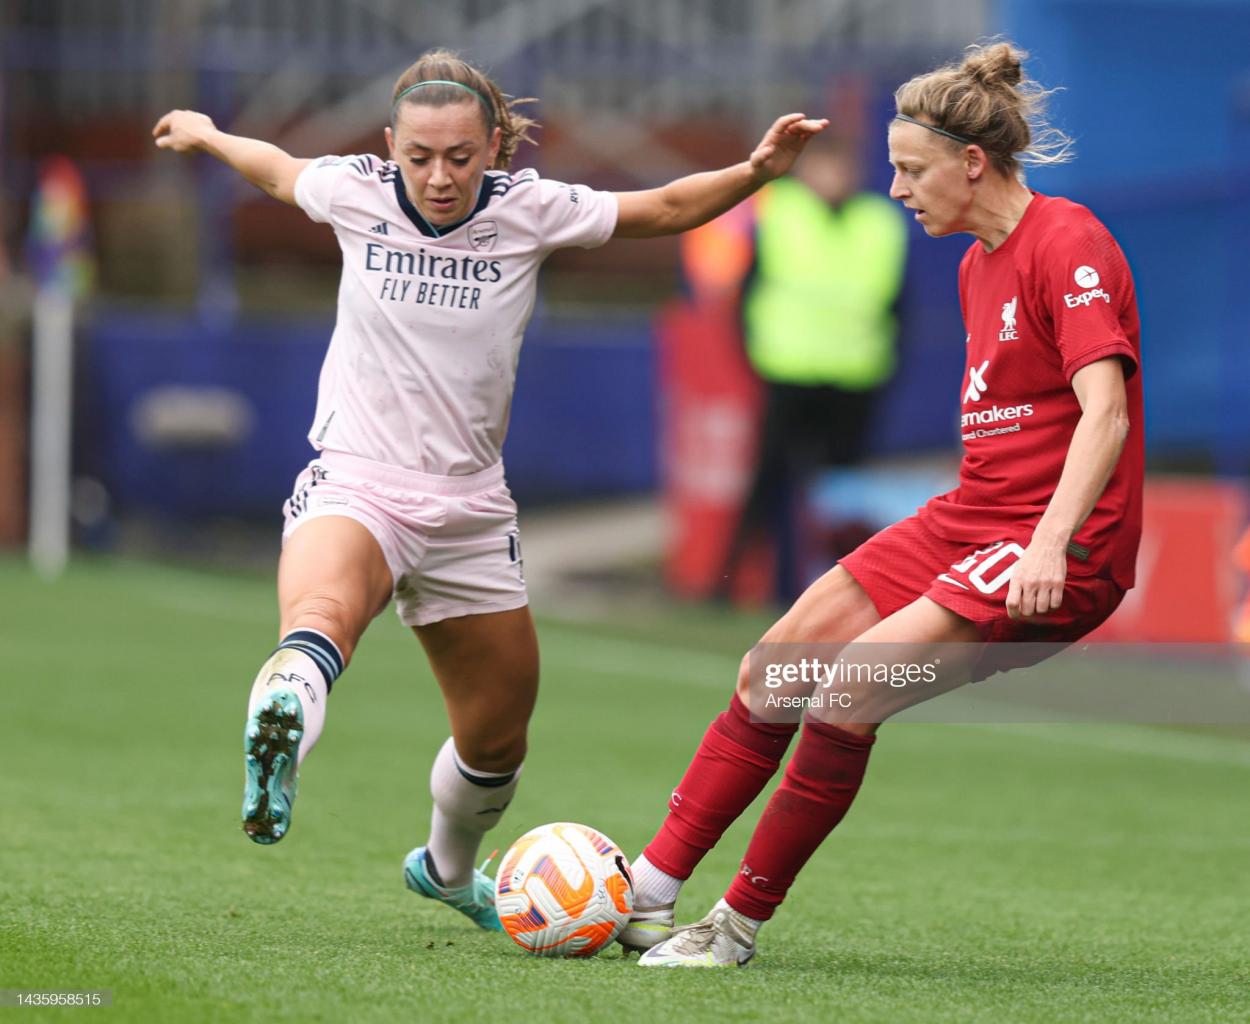 Katie McCabe of Arsenal closes down Yana Daniels of Liverpool during the FA Women's Super League match at Prenton Park on October 23, 2022 in Birkenhead, England. (Photo by Arsenal FC/Getty Images)